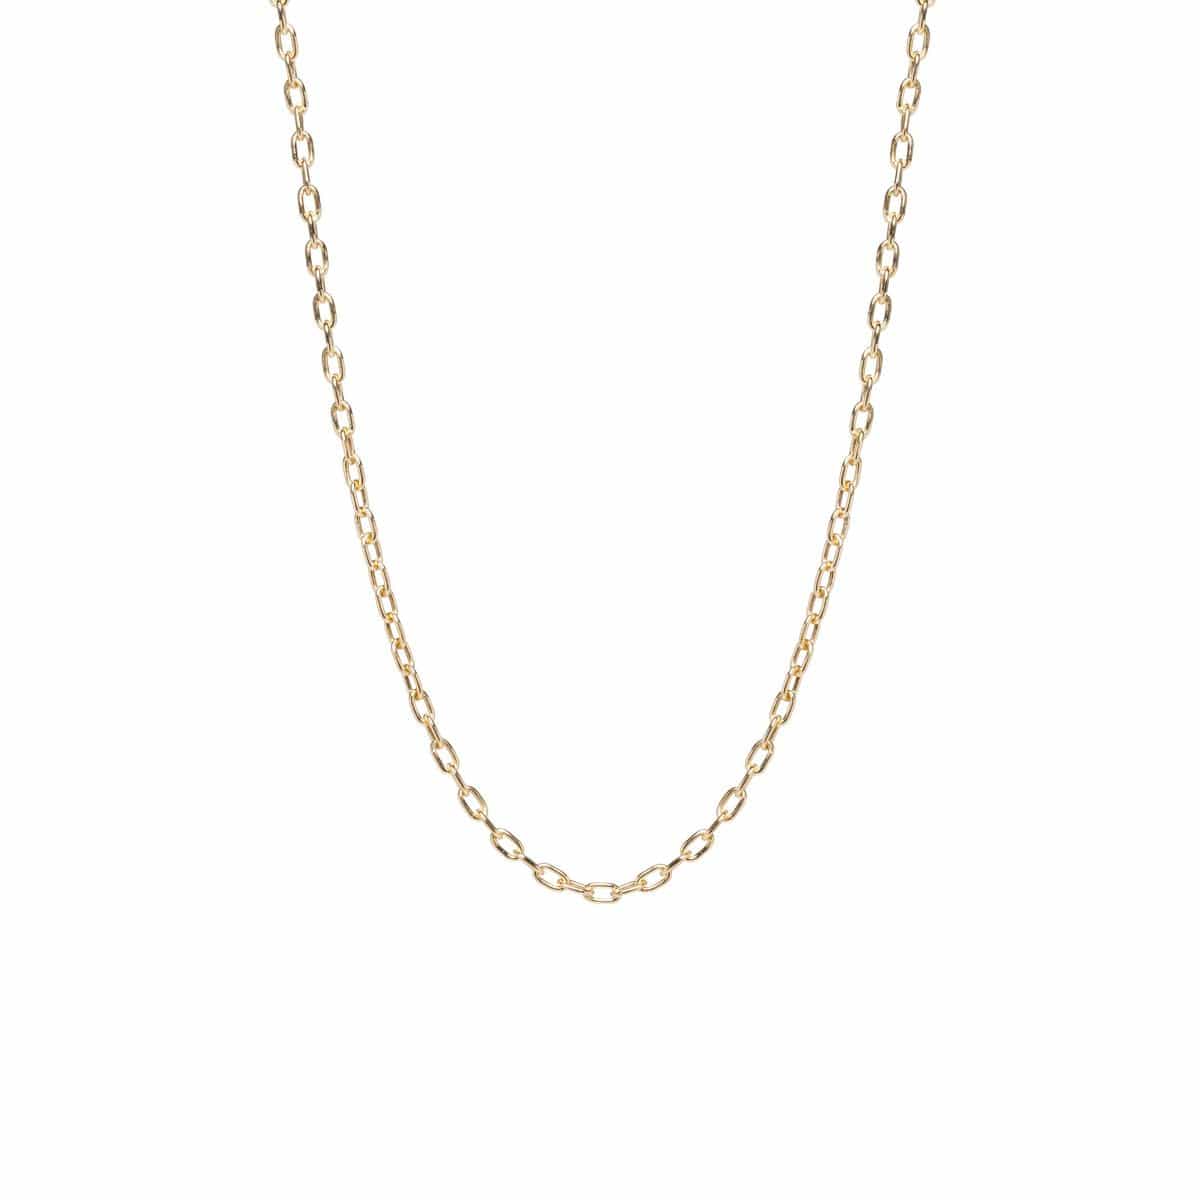 NKL-14K 14K Gold Small Square Oval-Link Chain Necklace